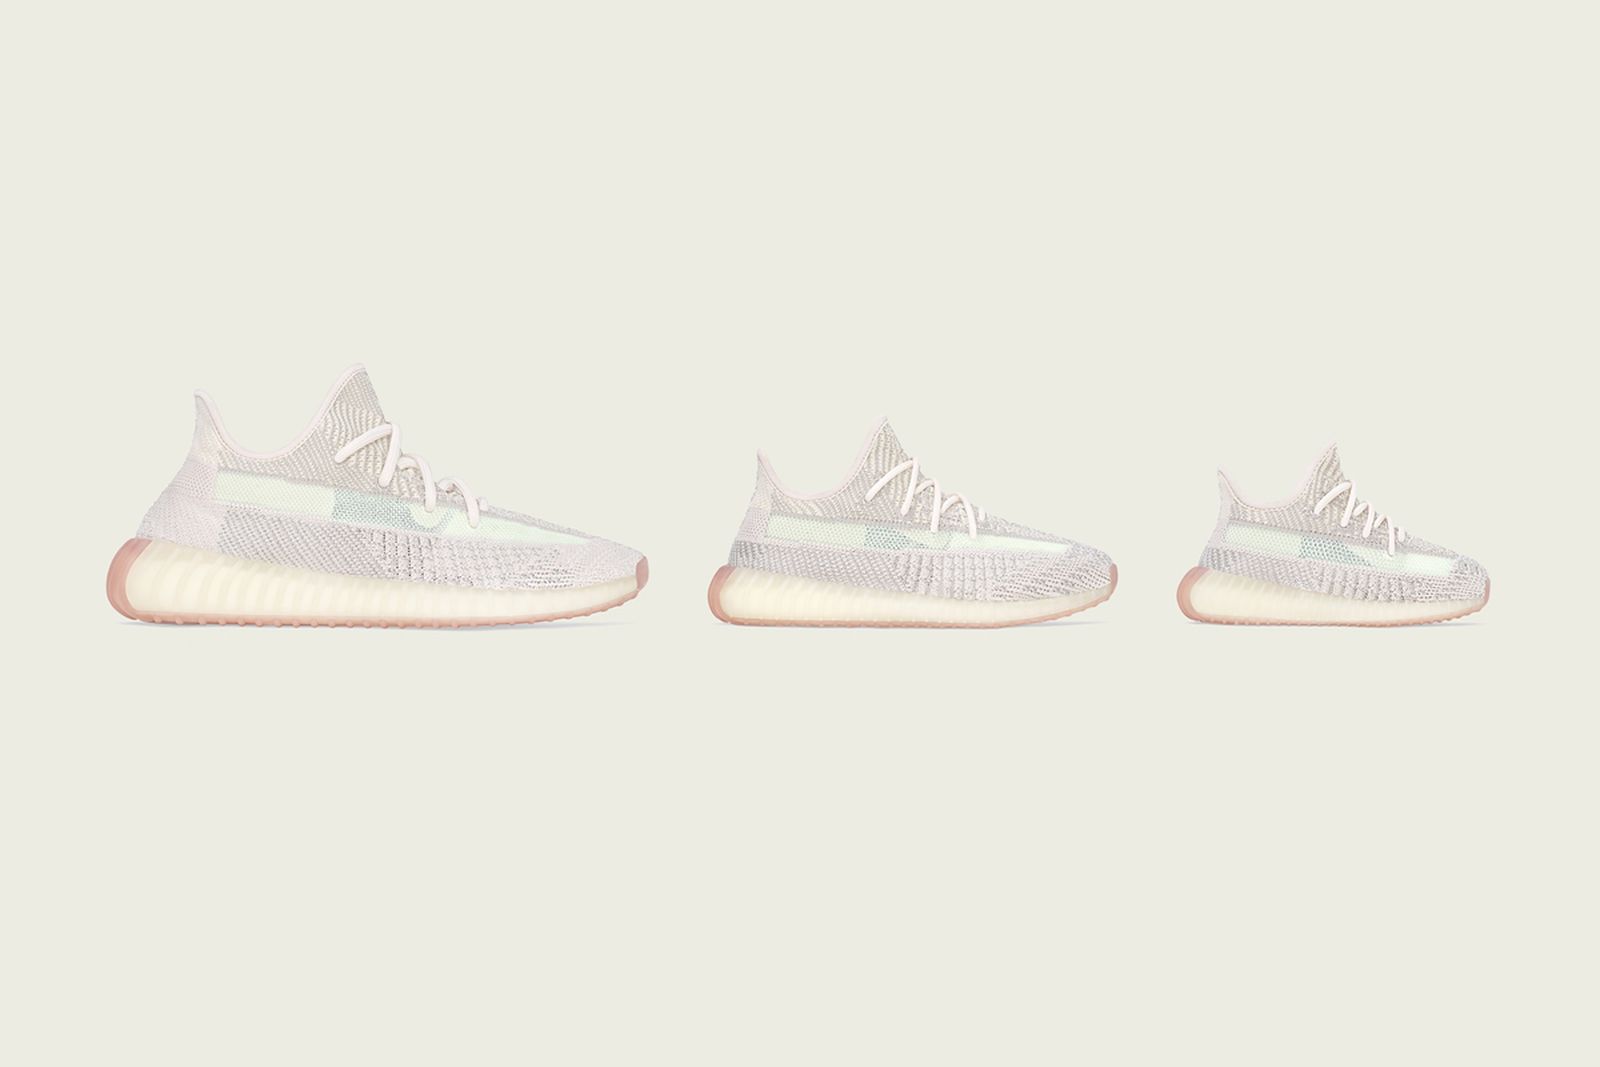 Shop the “Citrin” YEEZY Boost 350 V2 StockX